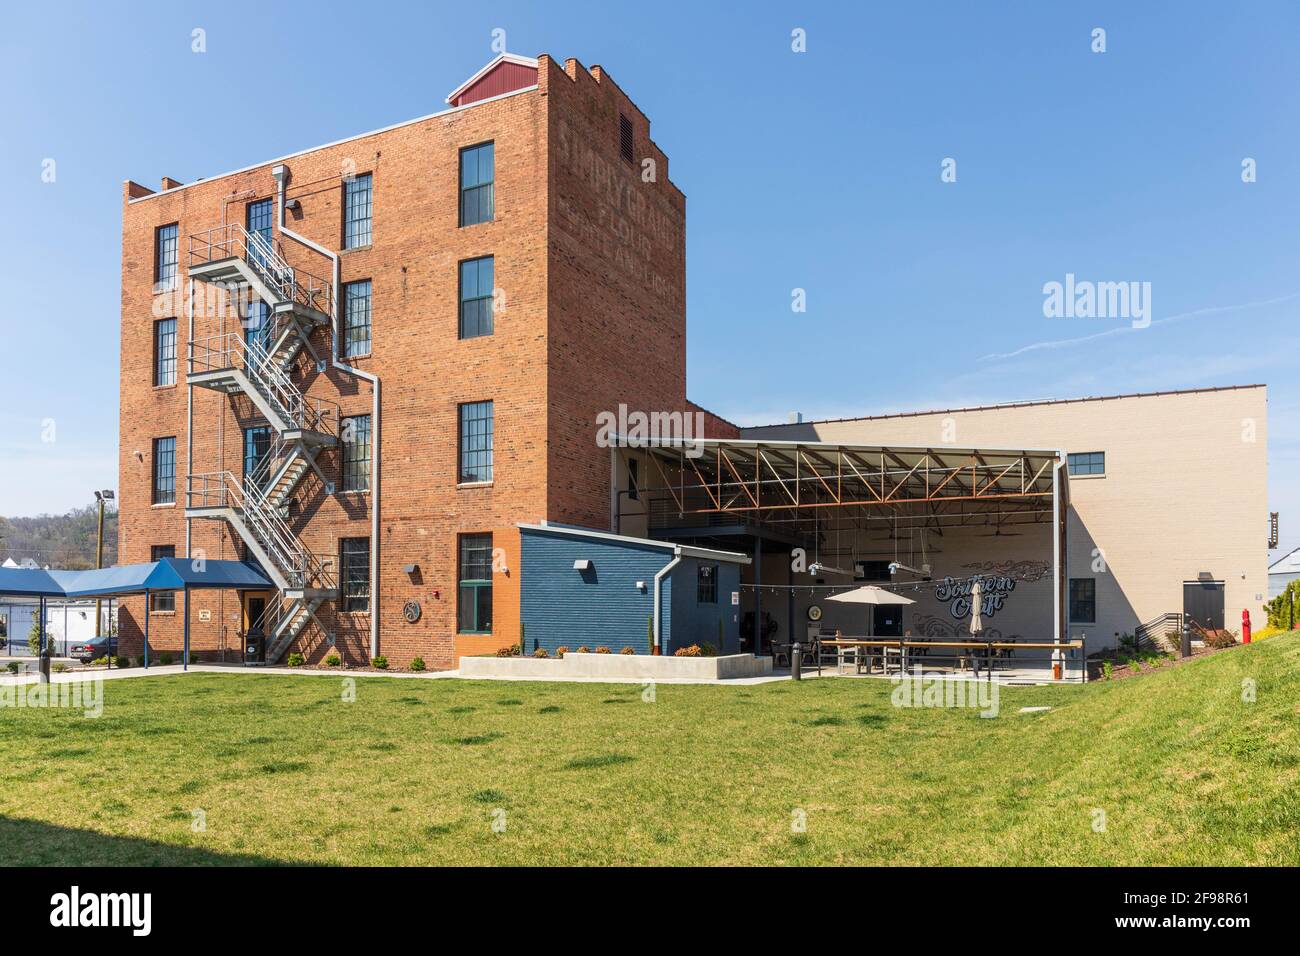 BRISTOL, TN-VA, USA-7 APRIL 2021: One of several historic industrial buildings now renovated as The Sessions Hotel, named after the famous 1927 record Stock Photo